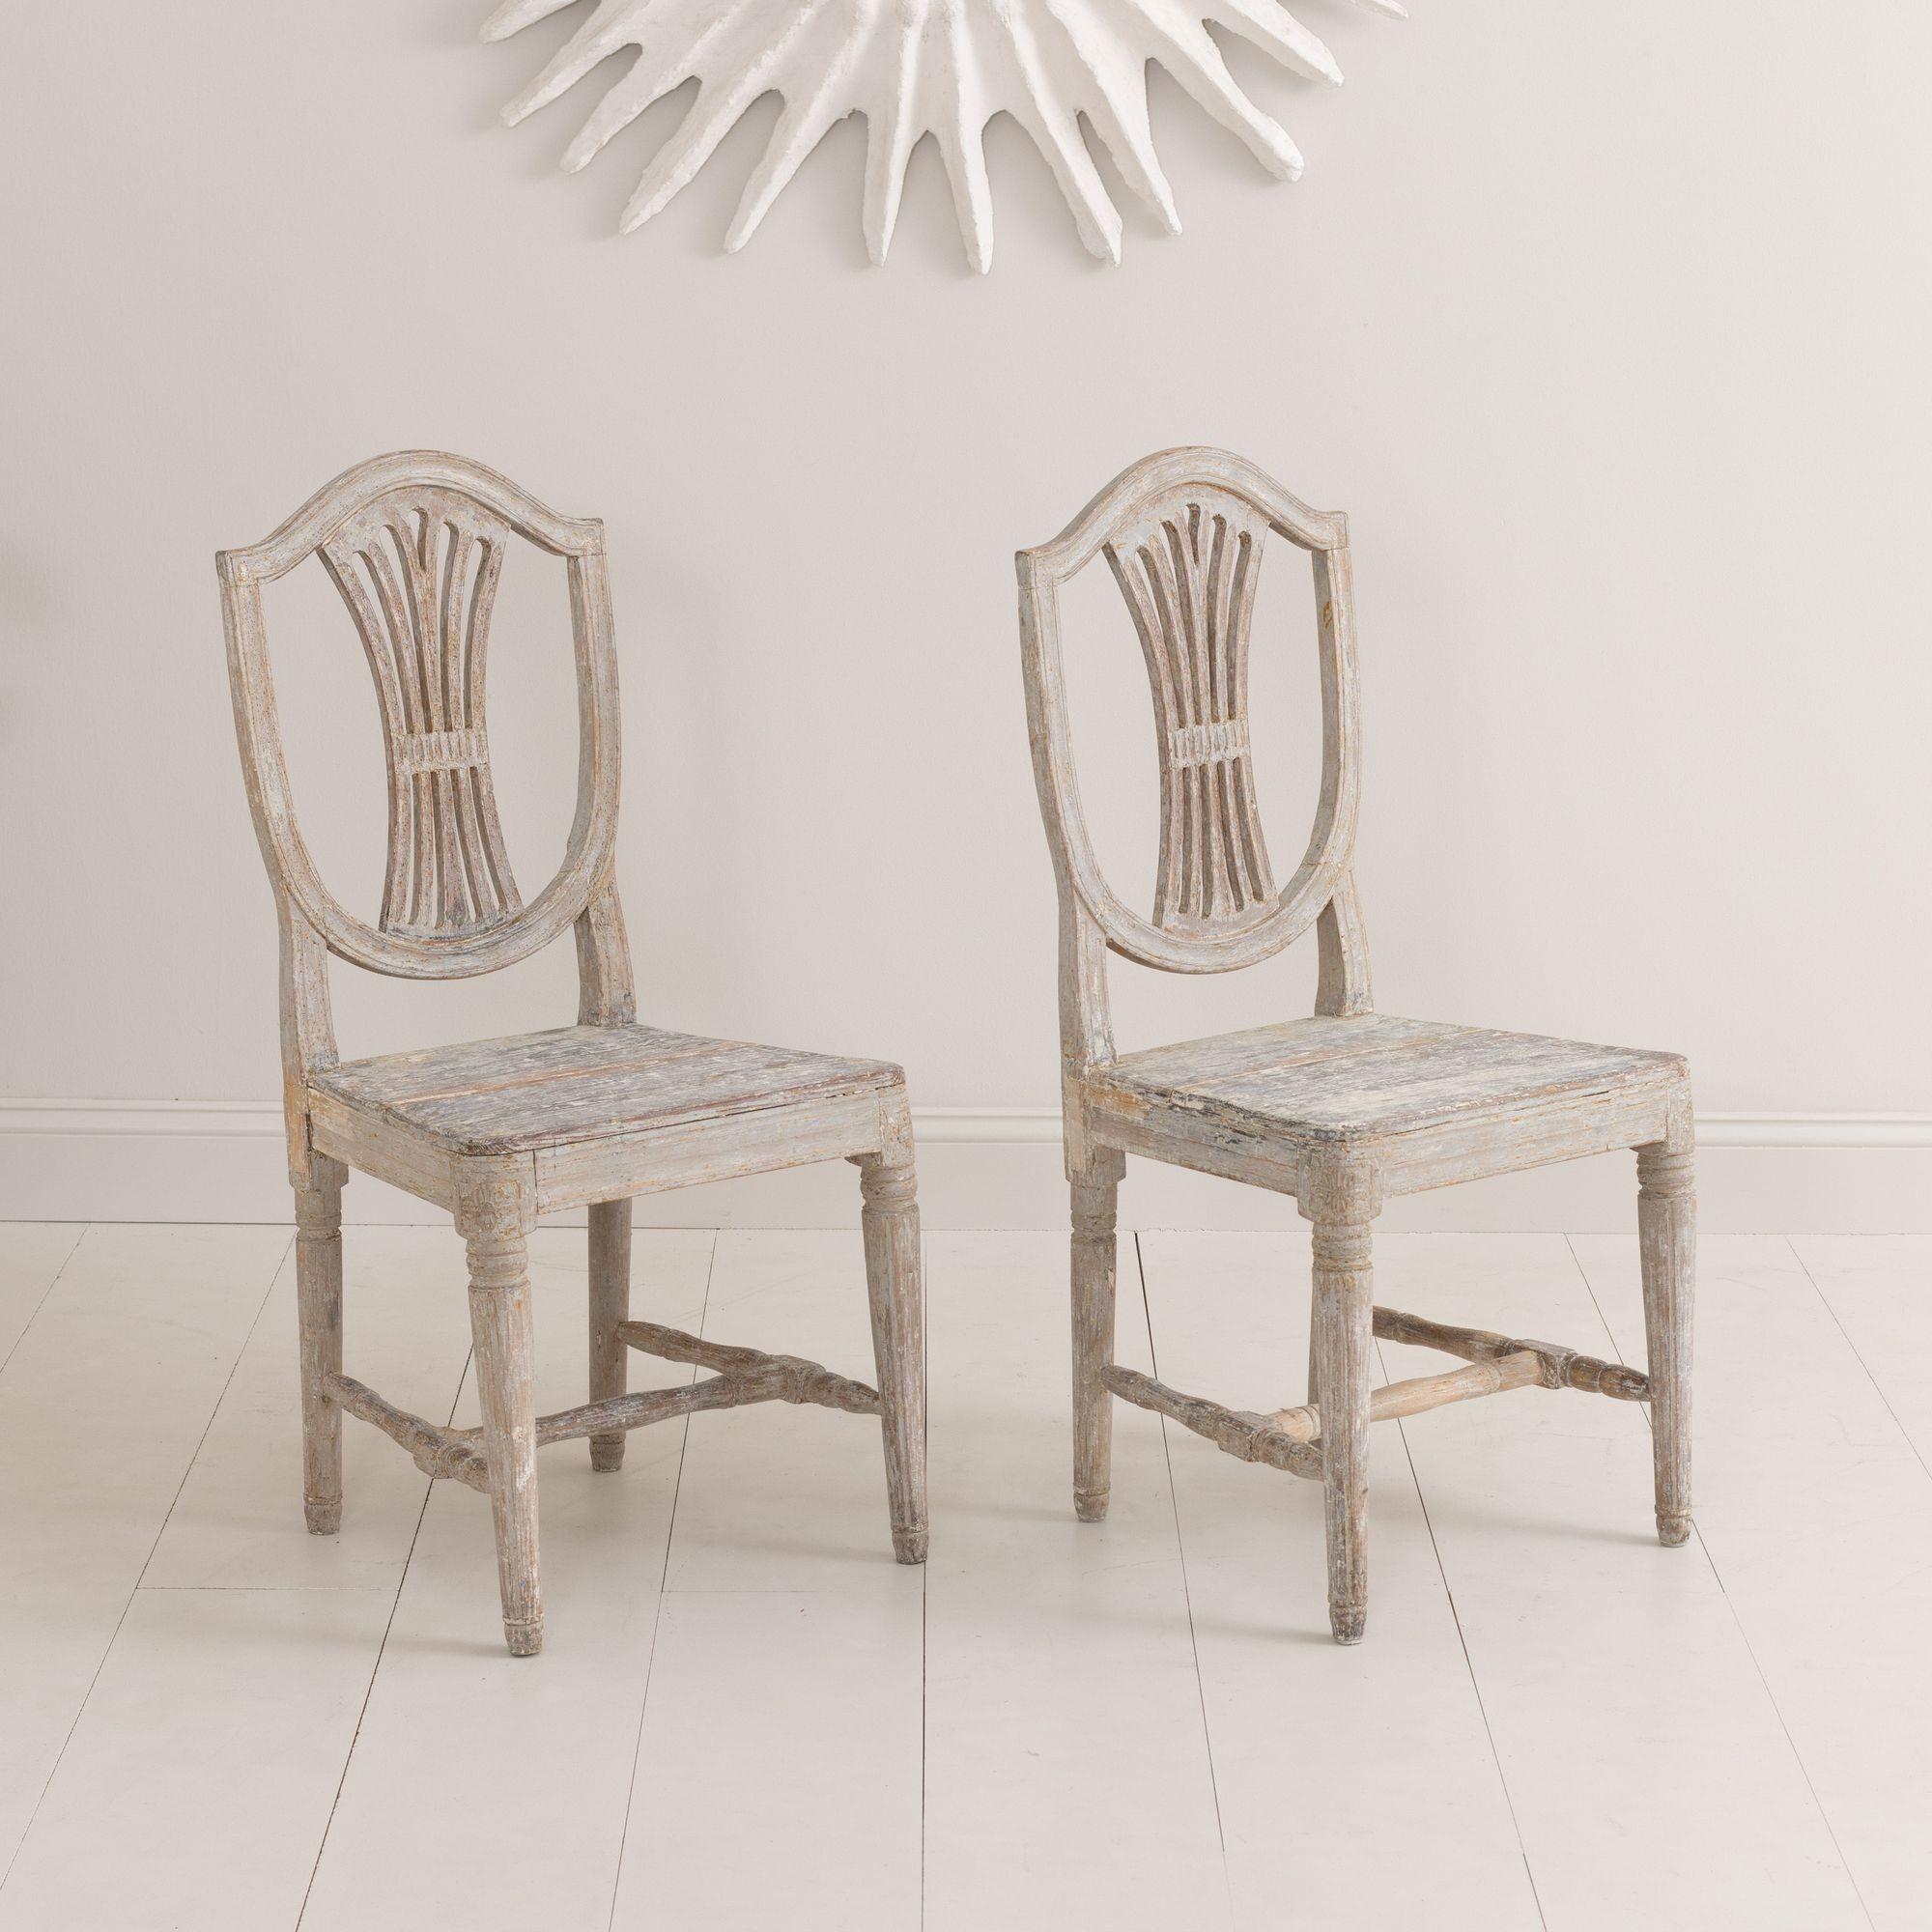 18th c. Pair of Swedish Gustavian Period Shield Back Chairs in Original Paint For Sale 8